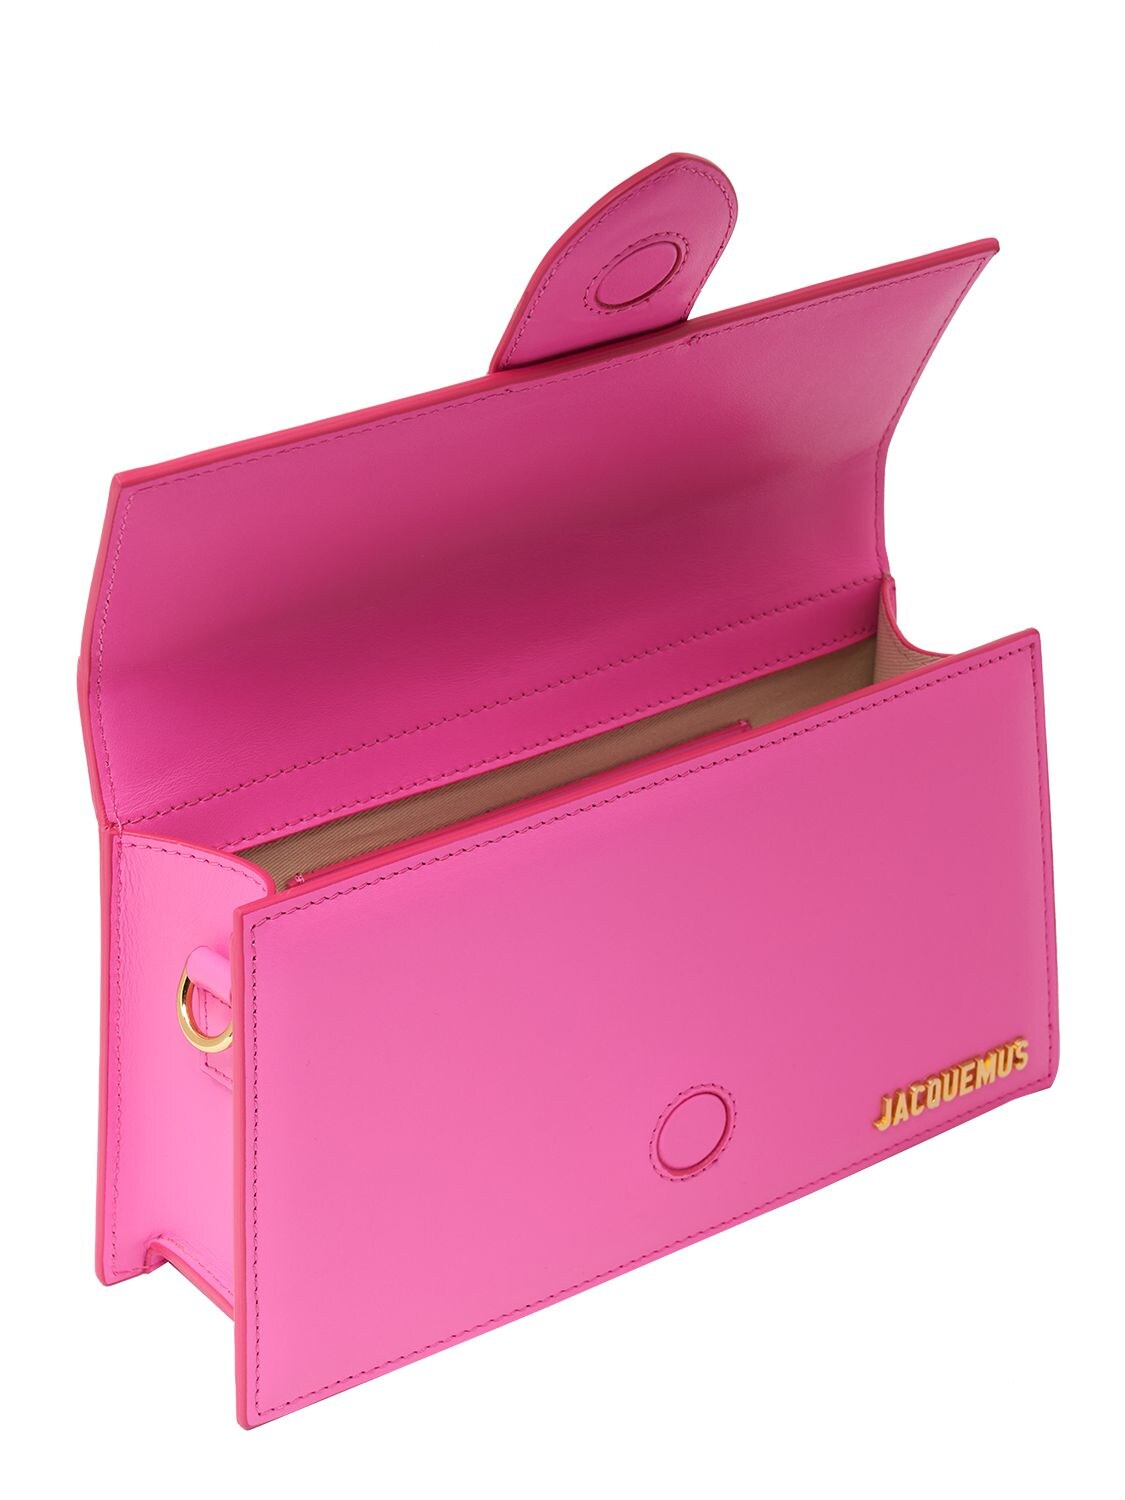 Shop Jacquemus Le Grand Bambino Smooth Leather Bag In Neon Pink